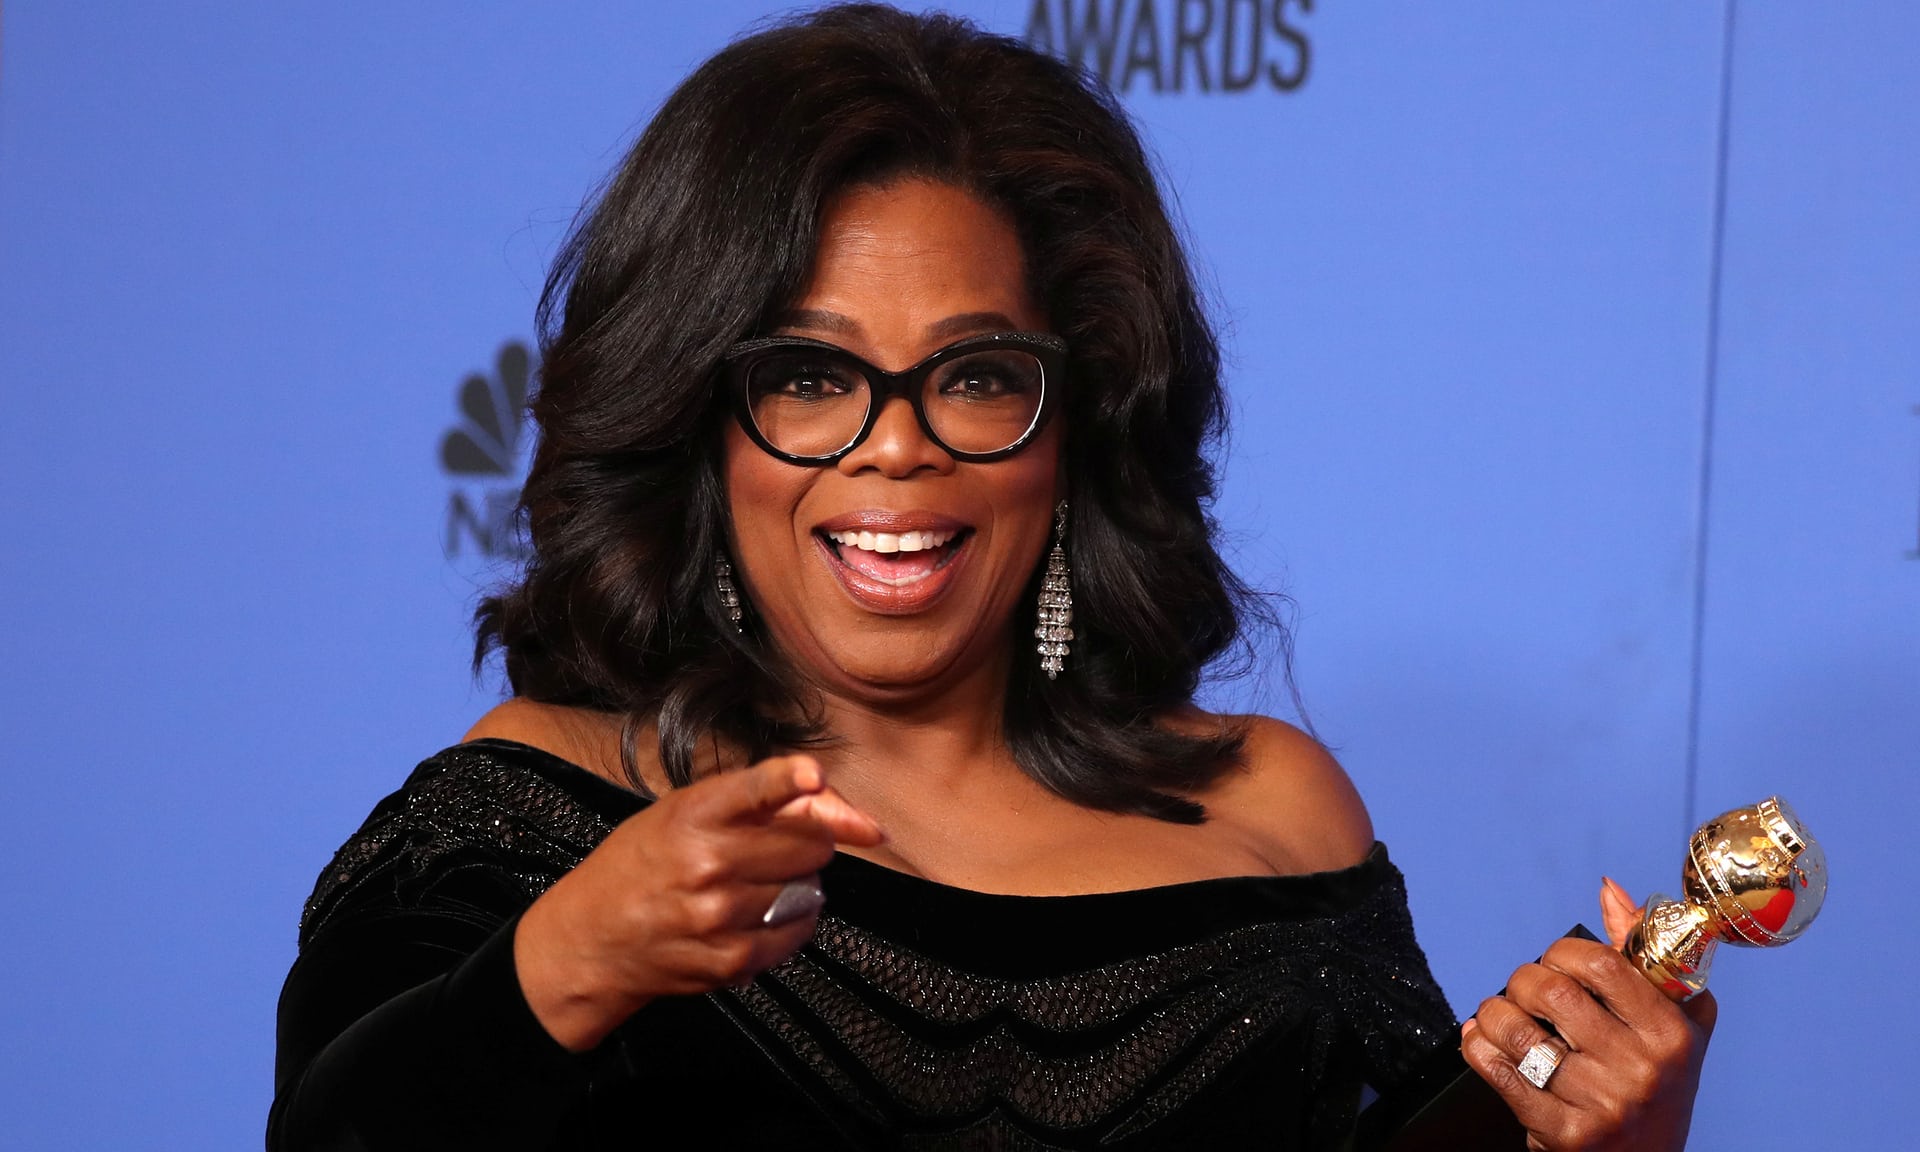 ‘The Color Purple’: Exactly how high is Oprah Winfrey’s net worth?